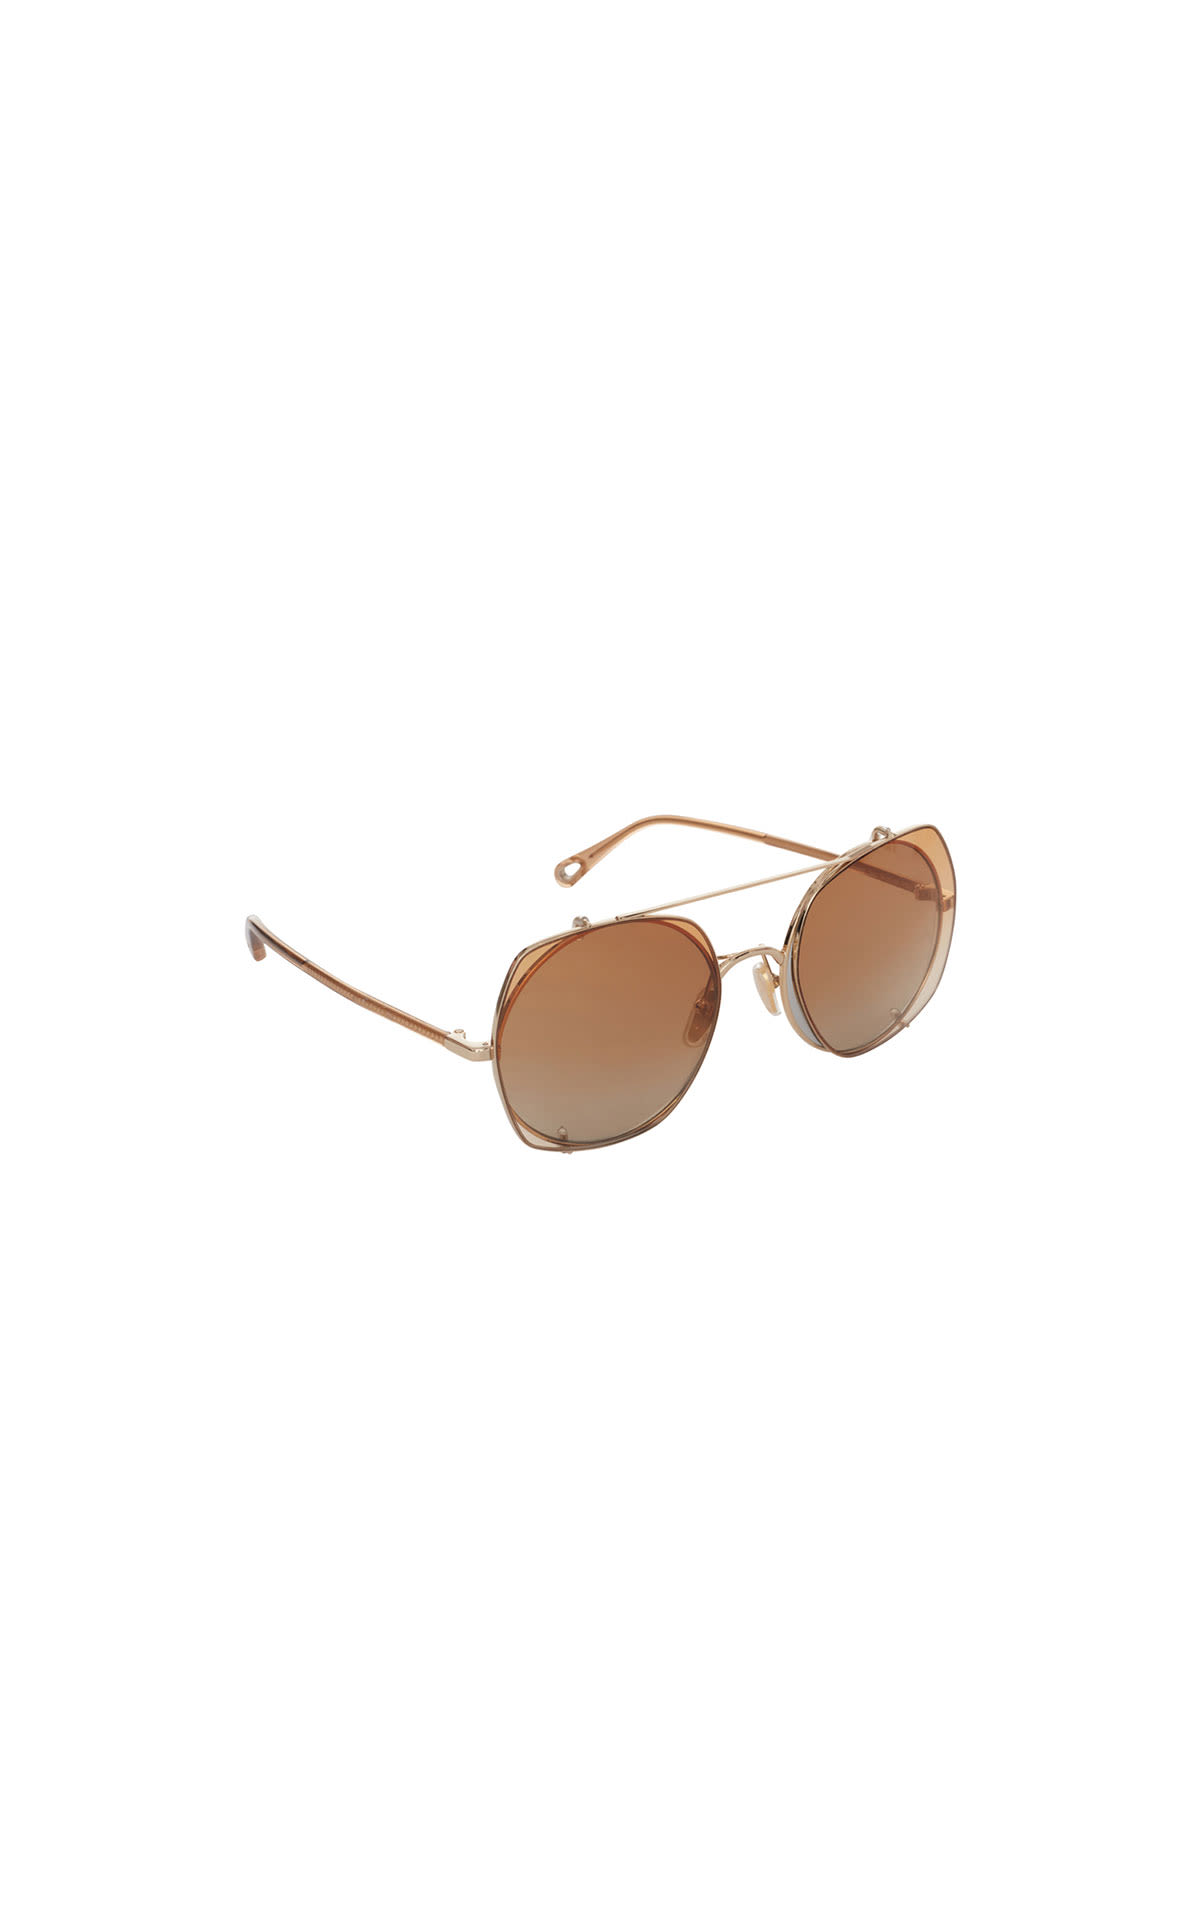 David Clulow Chloe sunglasses from Bicester Village